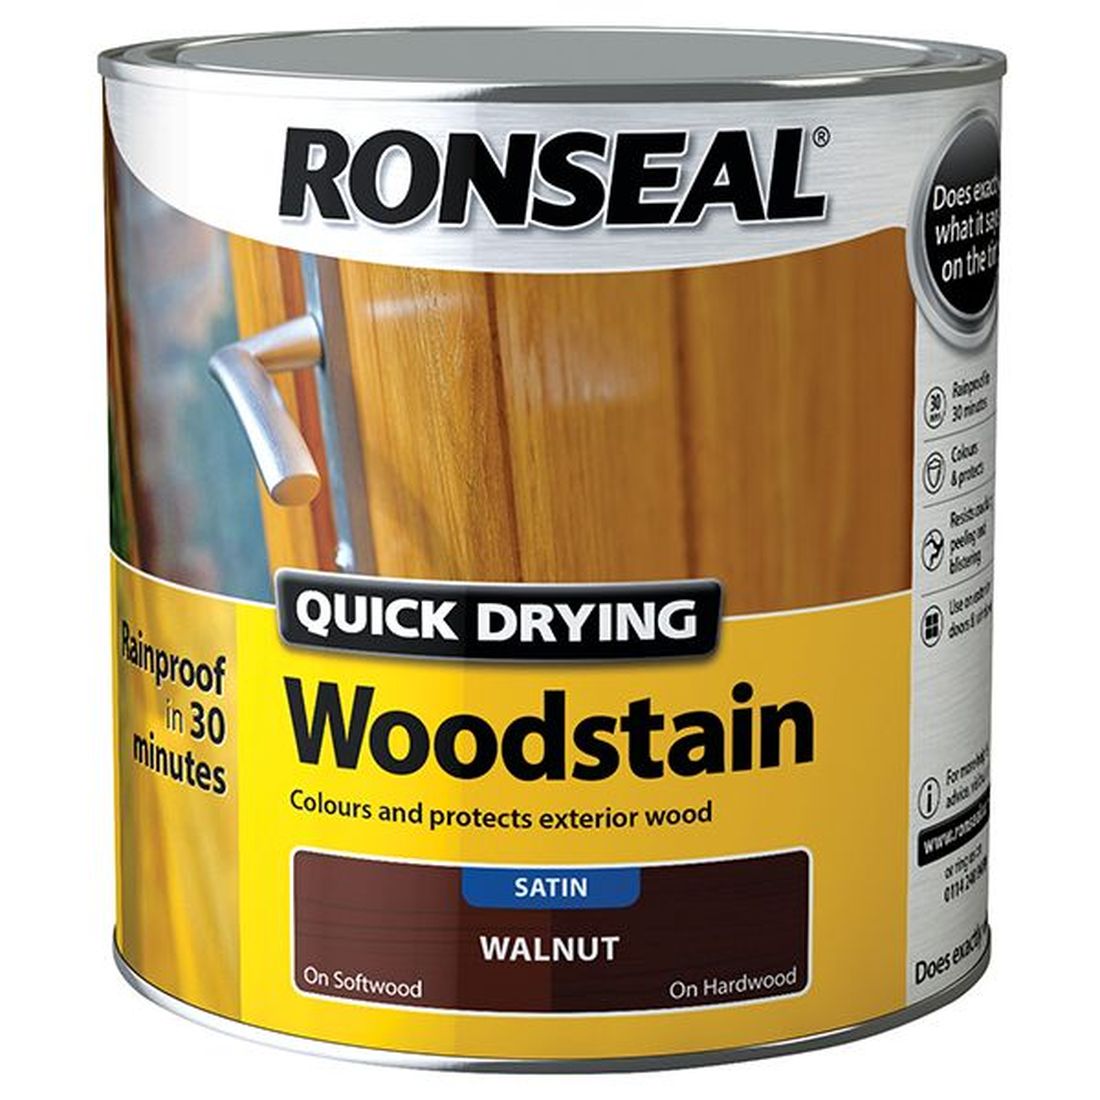 Ronseal Quick Drying Woodstain Satin Walnut 2.5 litre                                   